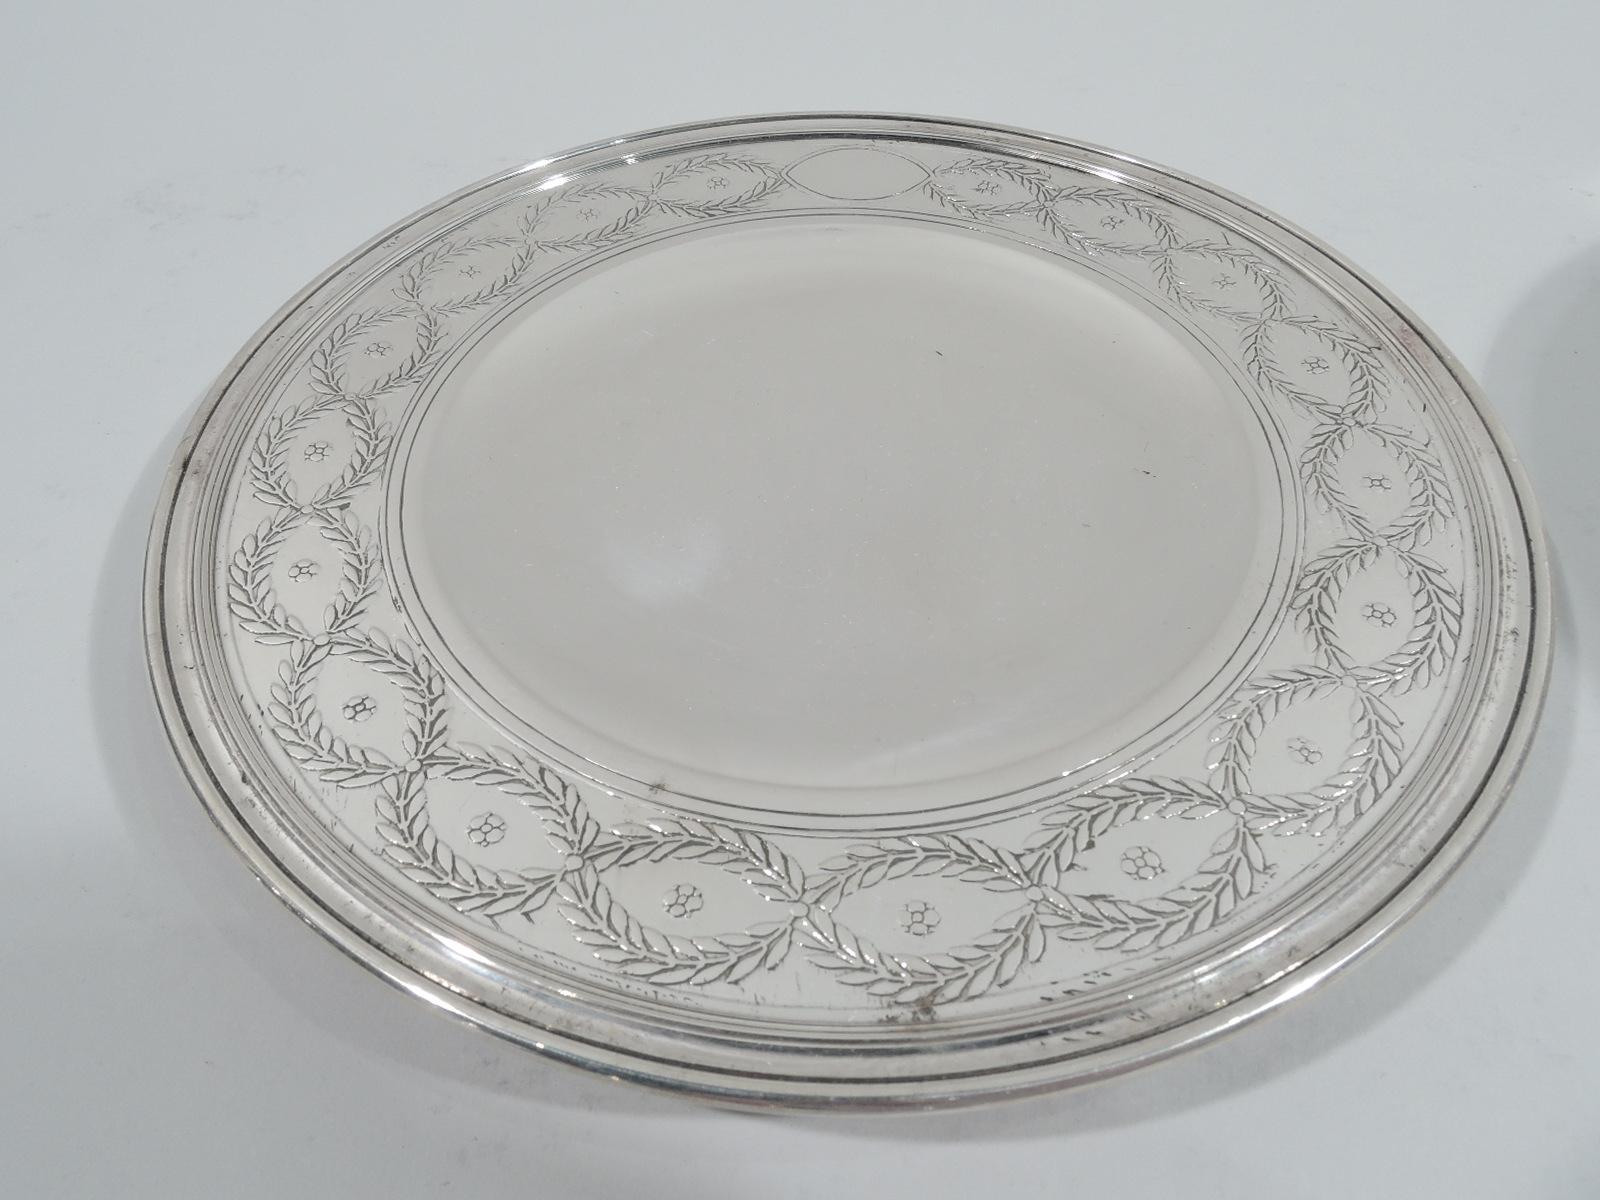 Set of 12 Winthrop sterling silver dessert plates Made by Tiffany & Co. in New York, ca 1920. Each: Round and curved well and wide shoulder with acid-etched laurel-wreath border inset with flower heads, and short inset foot. Fine pieces in the